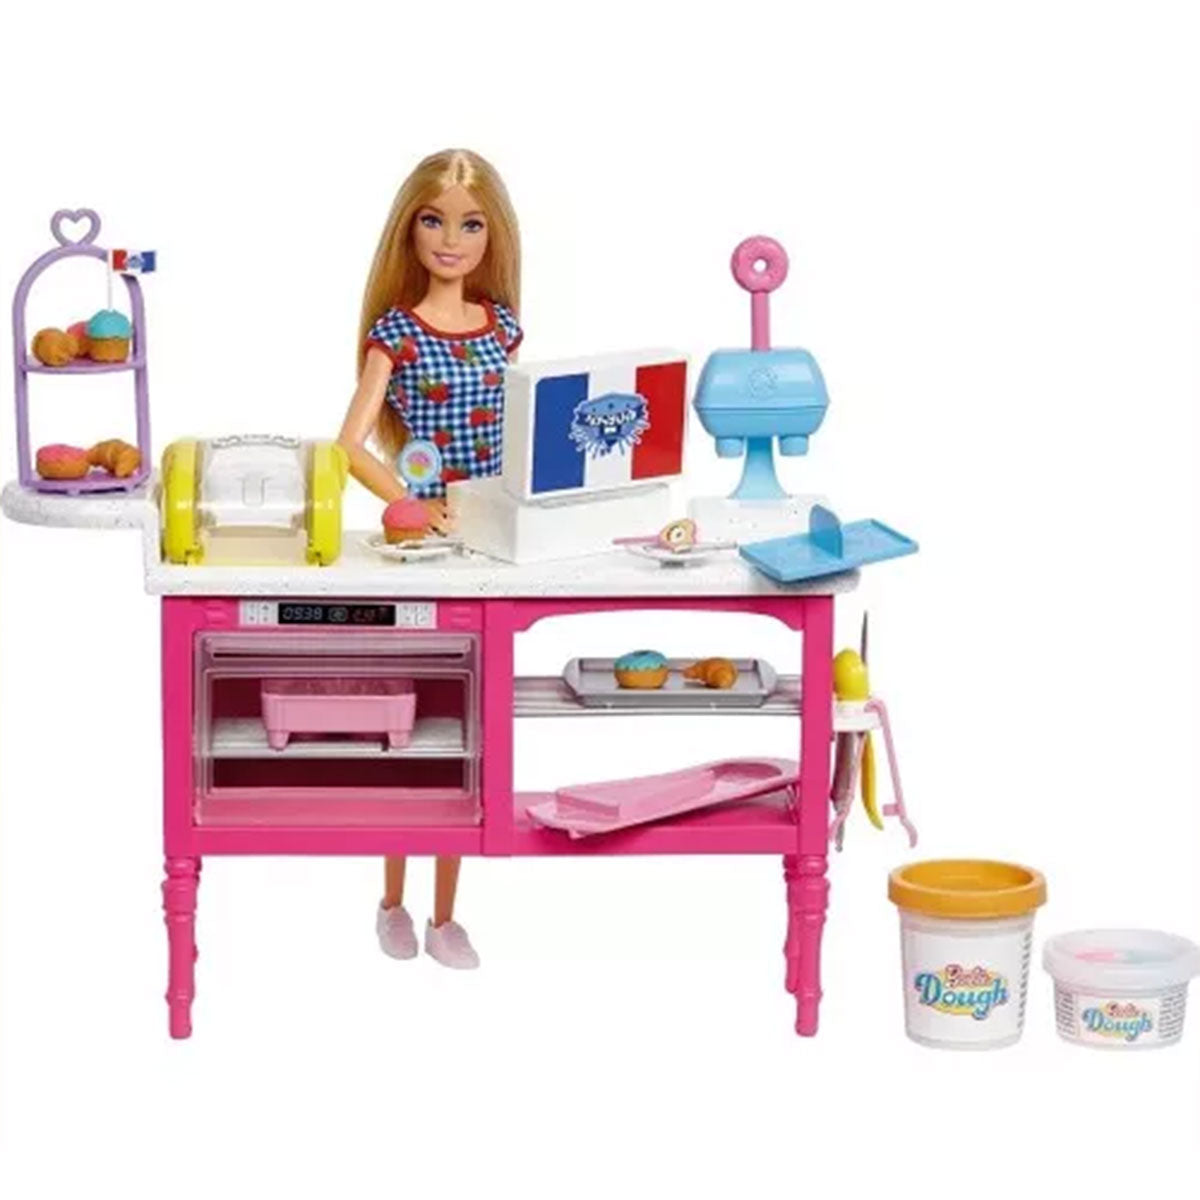 Barbie Doll And Playset, 53% OFF